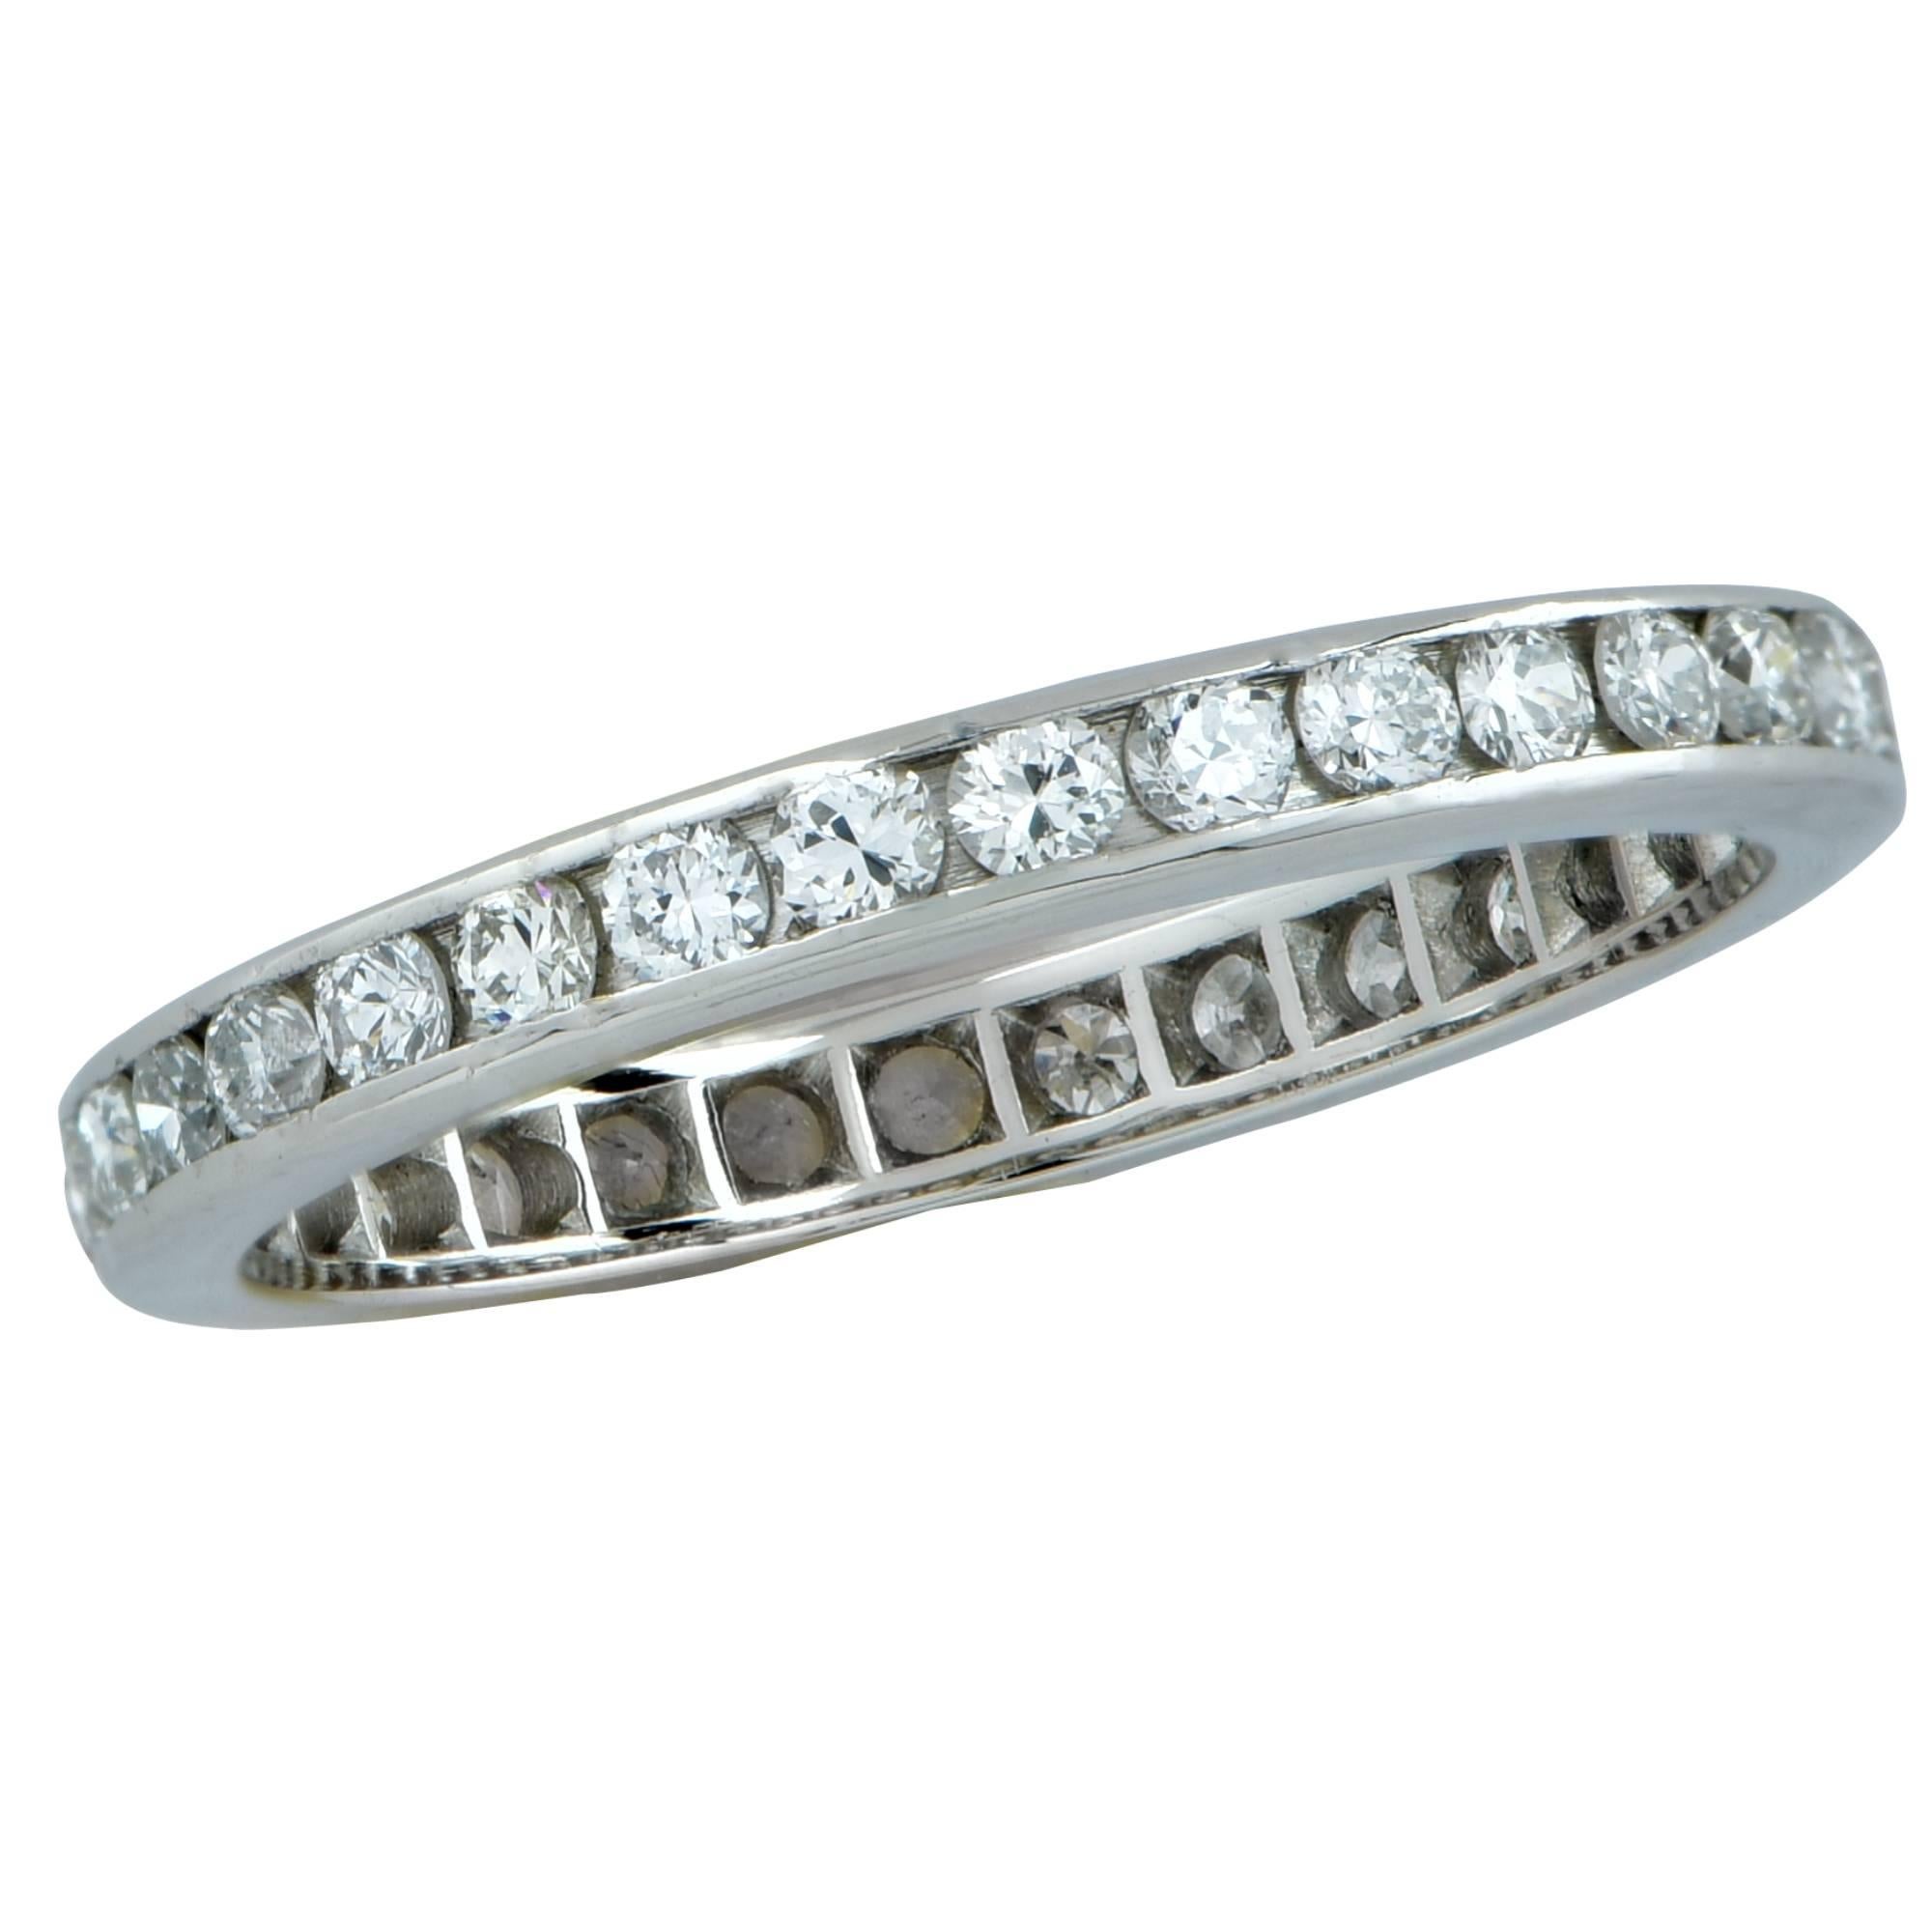 Platinum eternity band size 6. Featuring 33 round brilliant cut diamonds weighing approximately .80cts total, G color SI clarity.

Our pieces are all accompanied by an appraisal performed by one of our in-house GIA Graduates. They are also